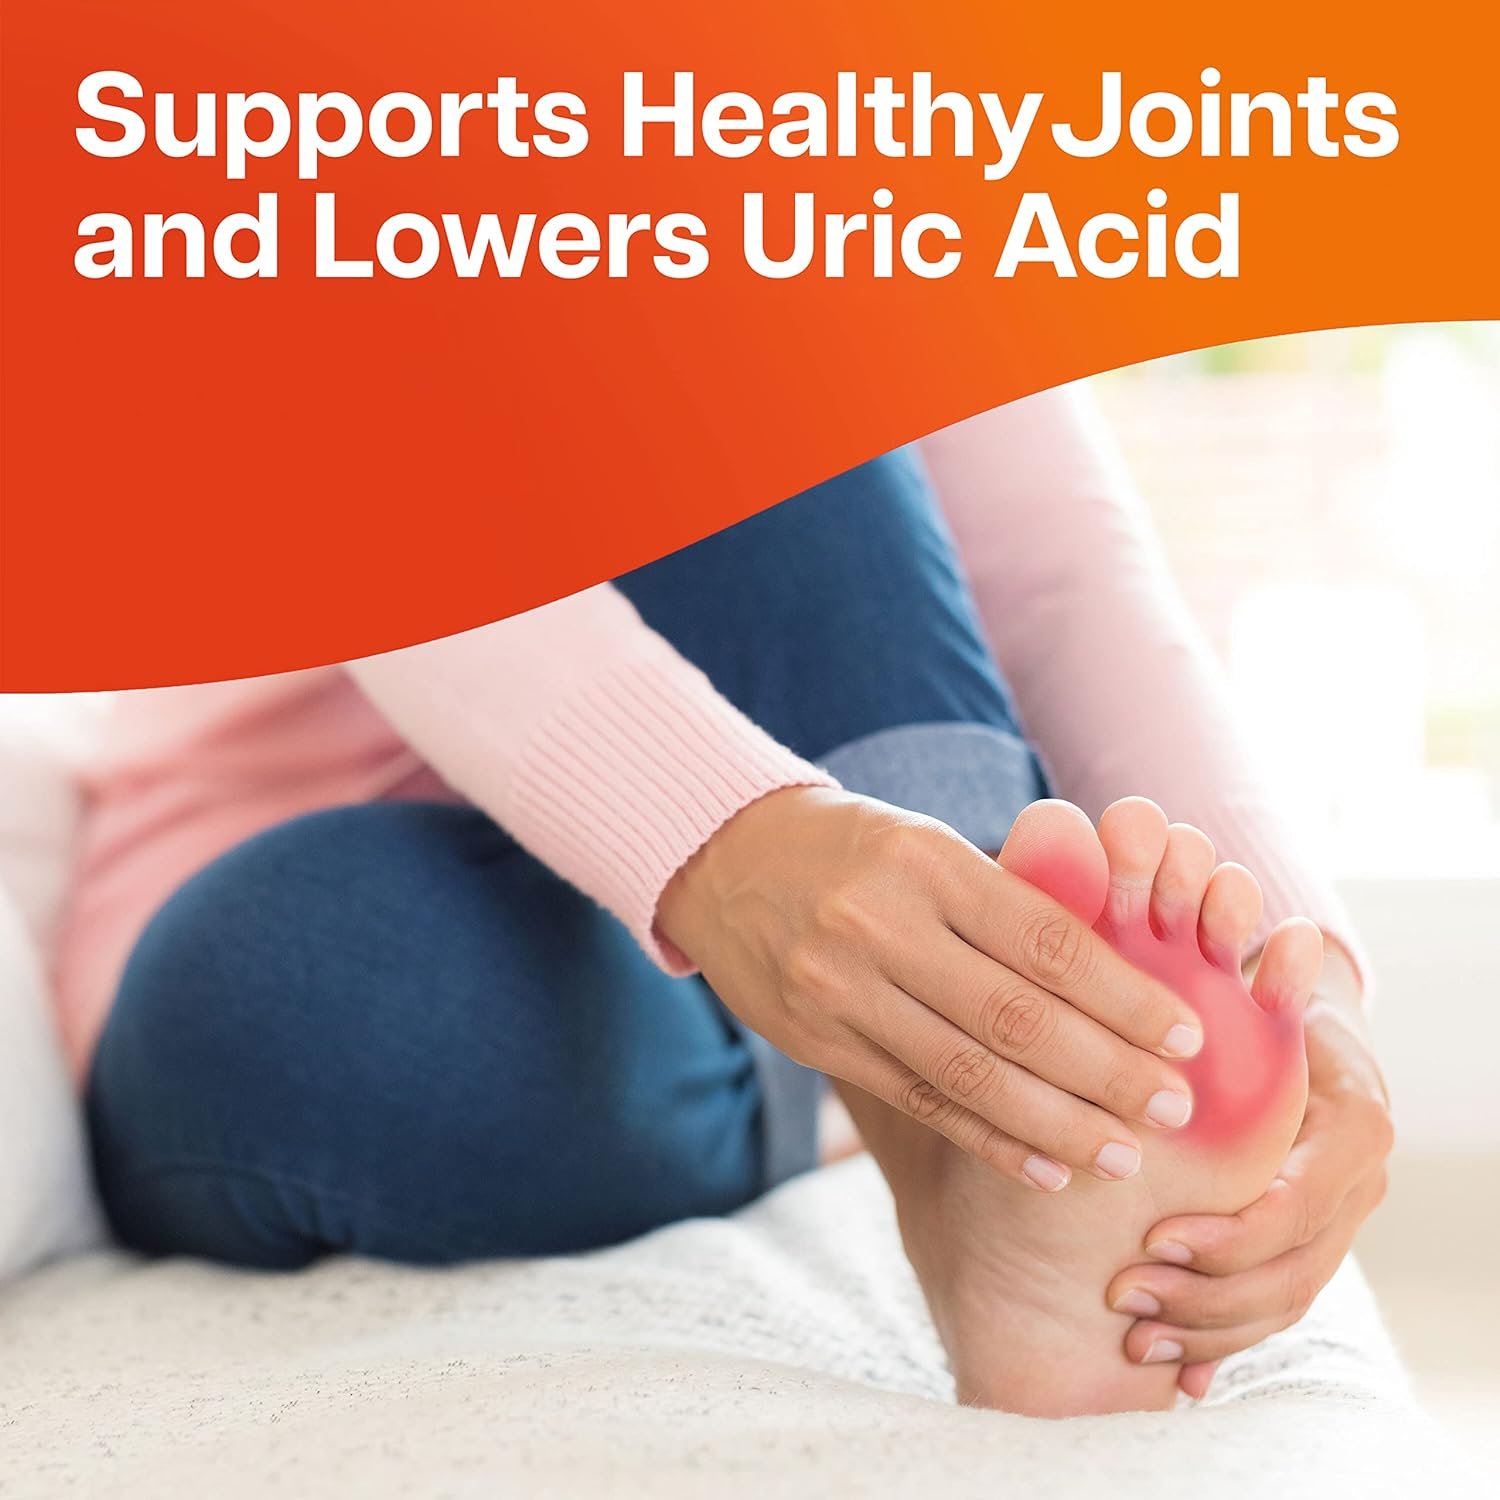 Advanced Uric Acid Control - 60 Veggie Capsules with 625mg Tart Cherry  300mg Turmeric - Joint Comfort  Kidney Health Formula with Celery Seed Extract